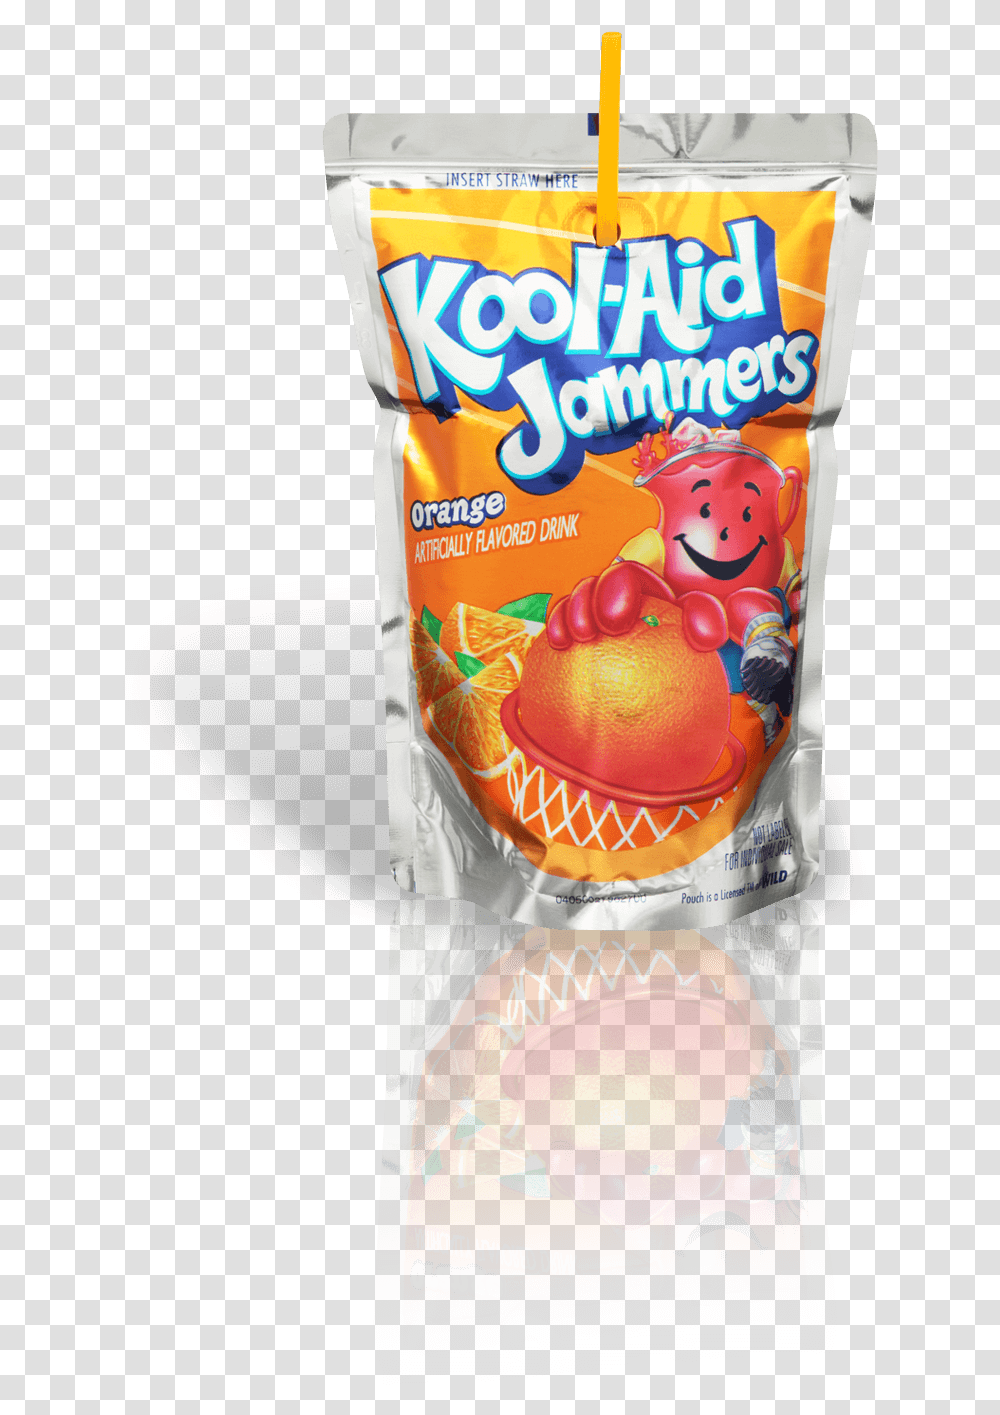 Kool Aid Jammers Orange Flavored Drink 60 Fl Oz Box Kool Aid Jammers Strawberry, Food, Sweets, Confectionery, Snack Transparent Png